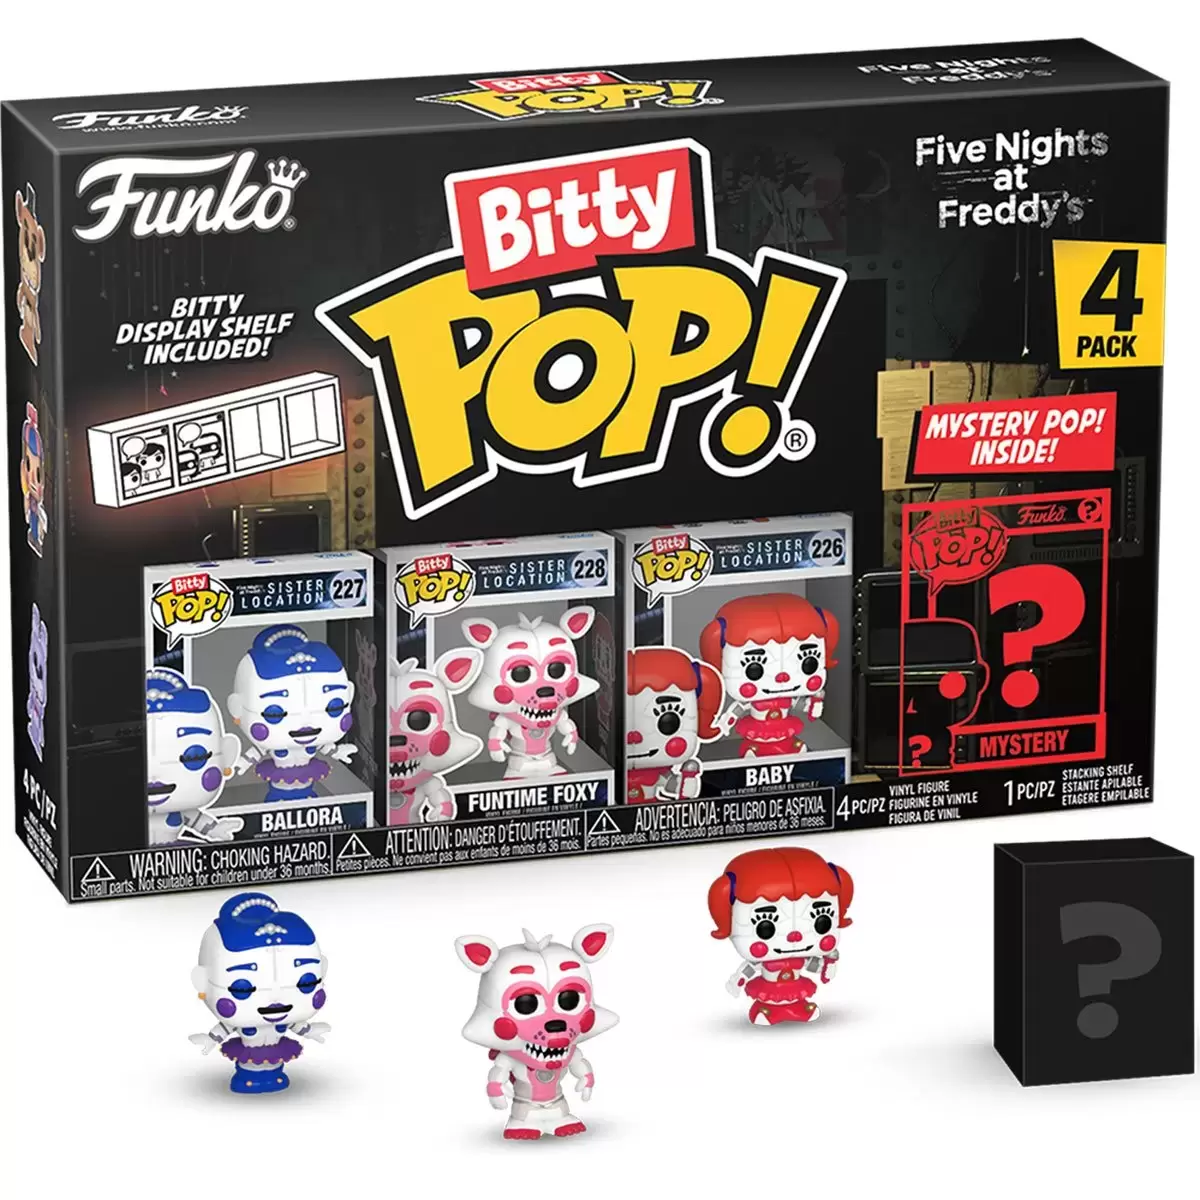 Bitty POP! - Five Nights at Freddy\'s - Ballora, Funtime Foxy, Baby & Mystery